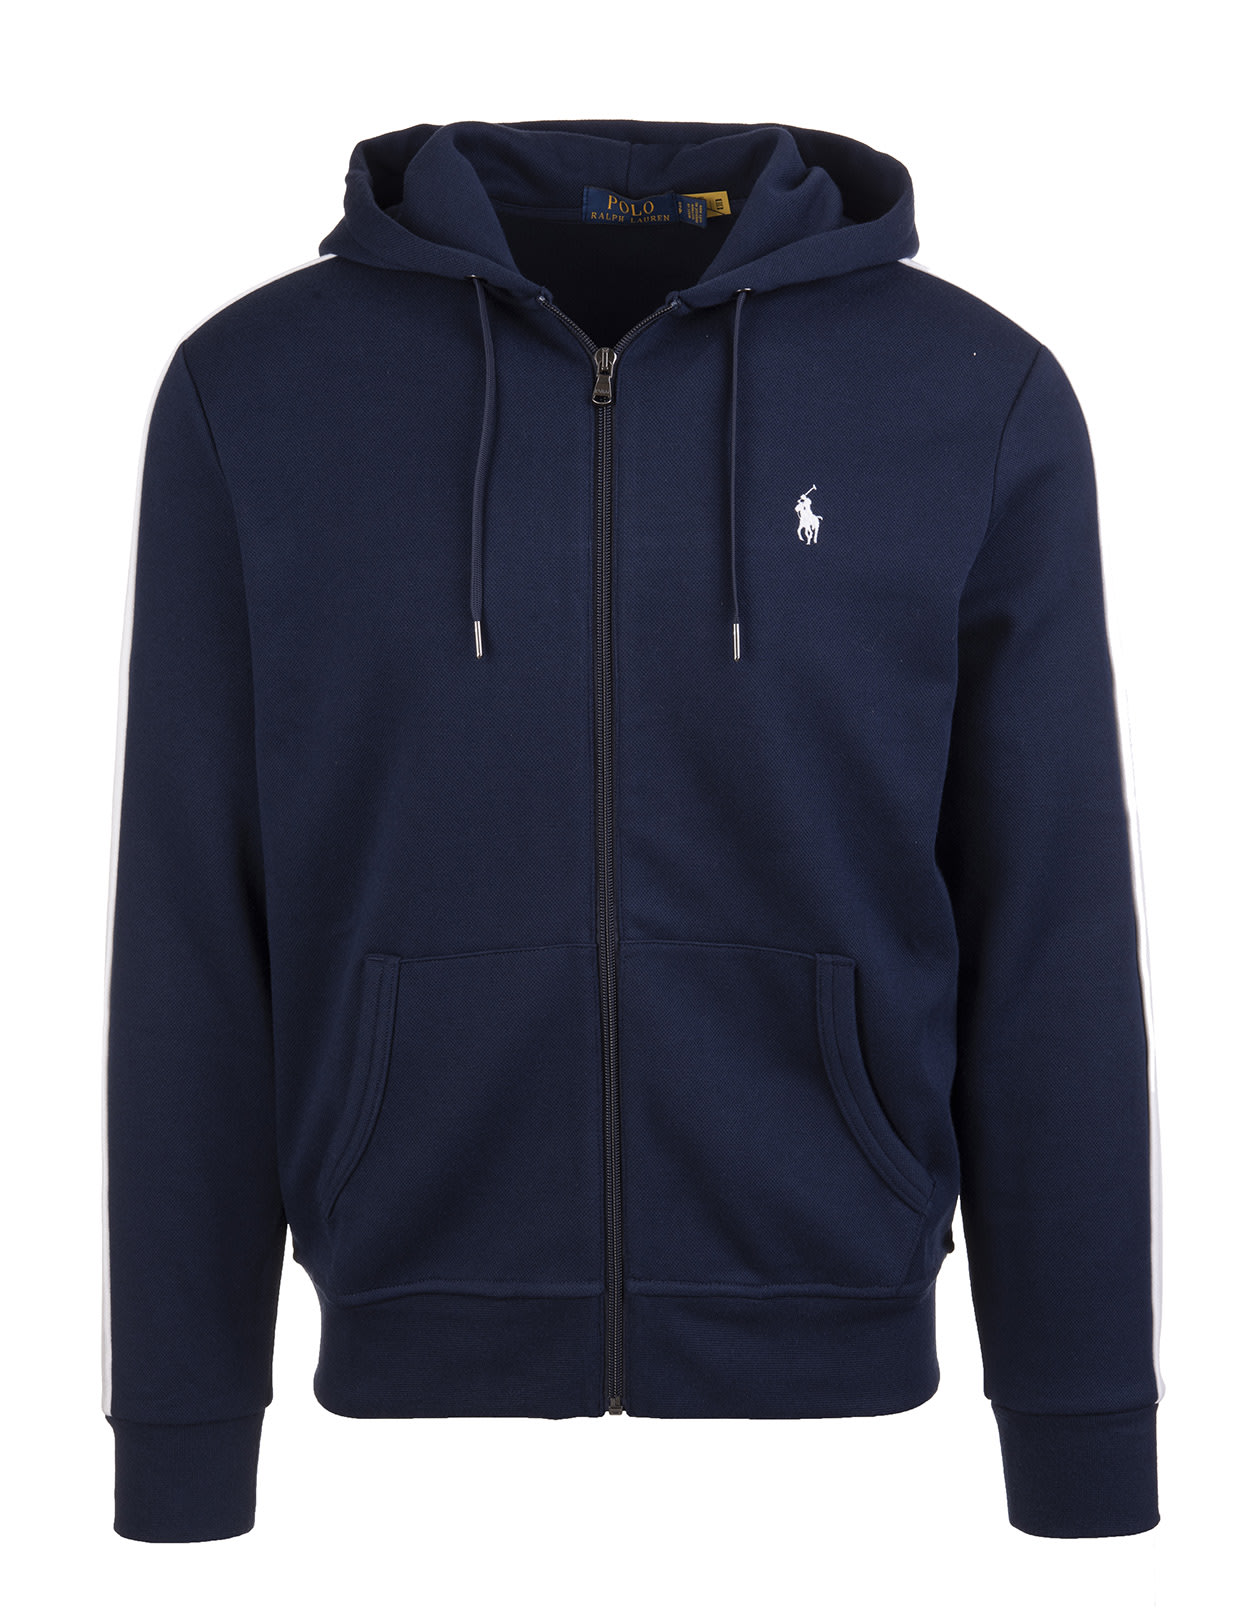 Ralph Lauren Man Navy Blue Hoodie With White Stripes And Back Print